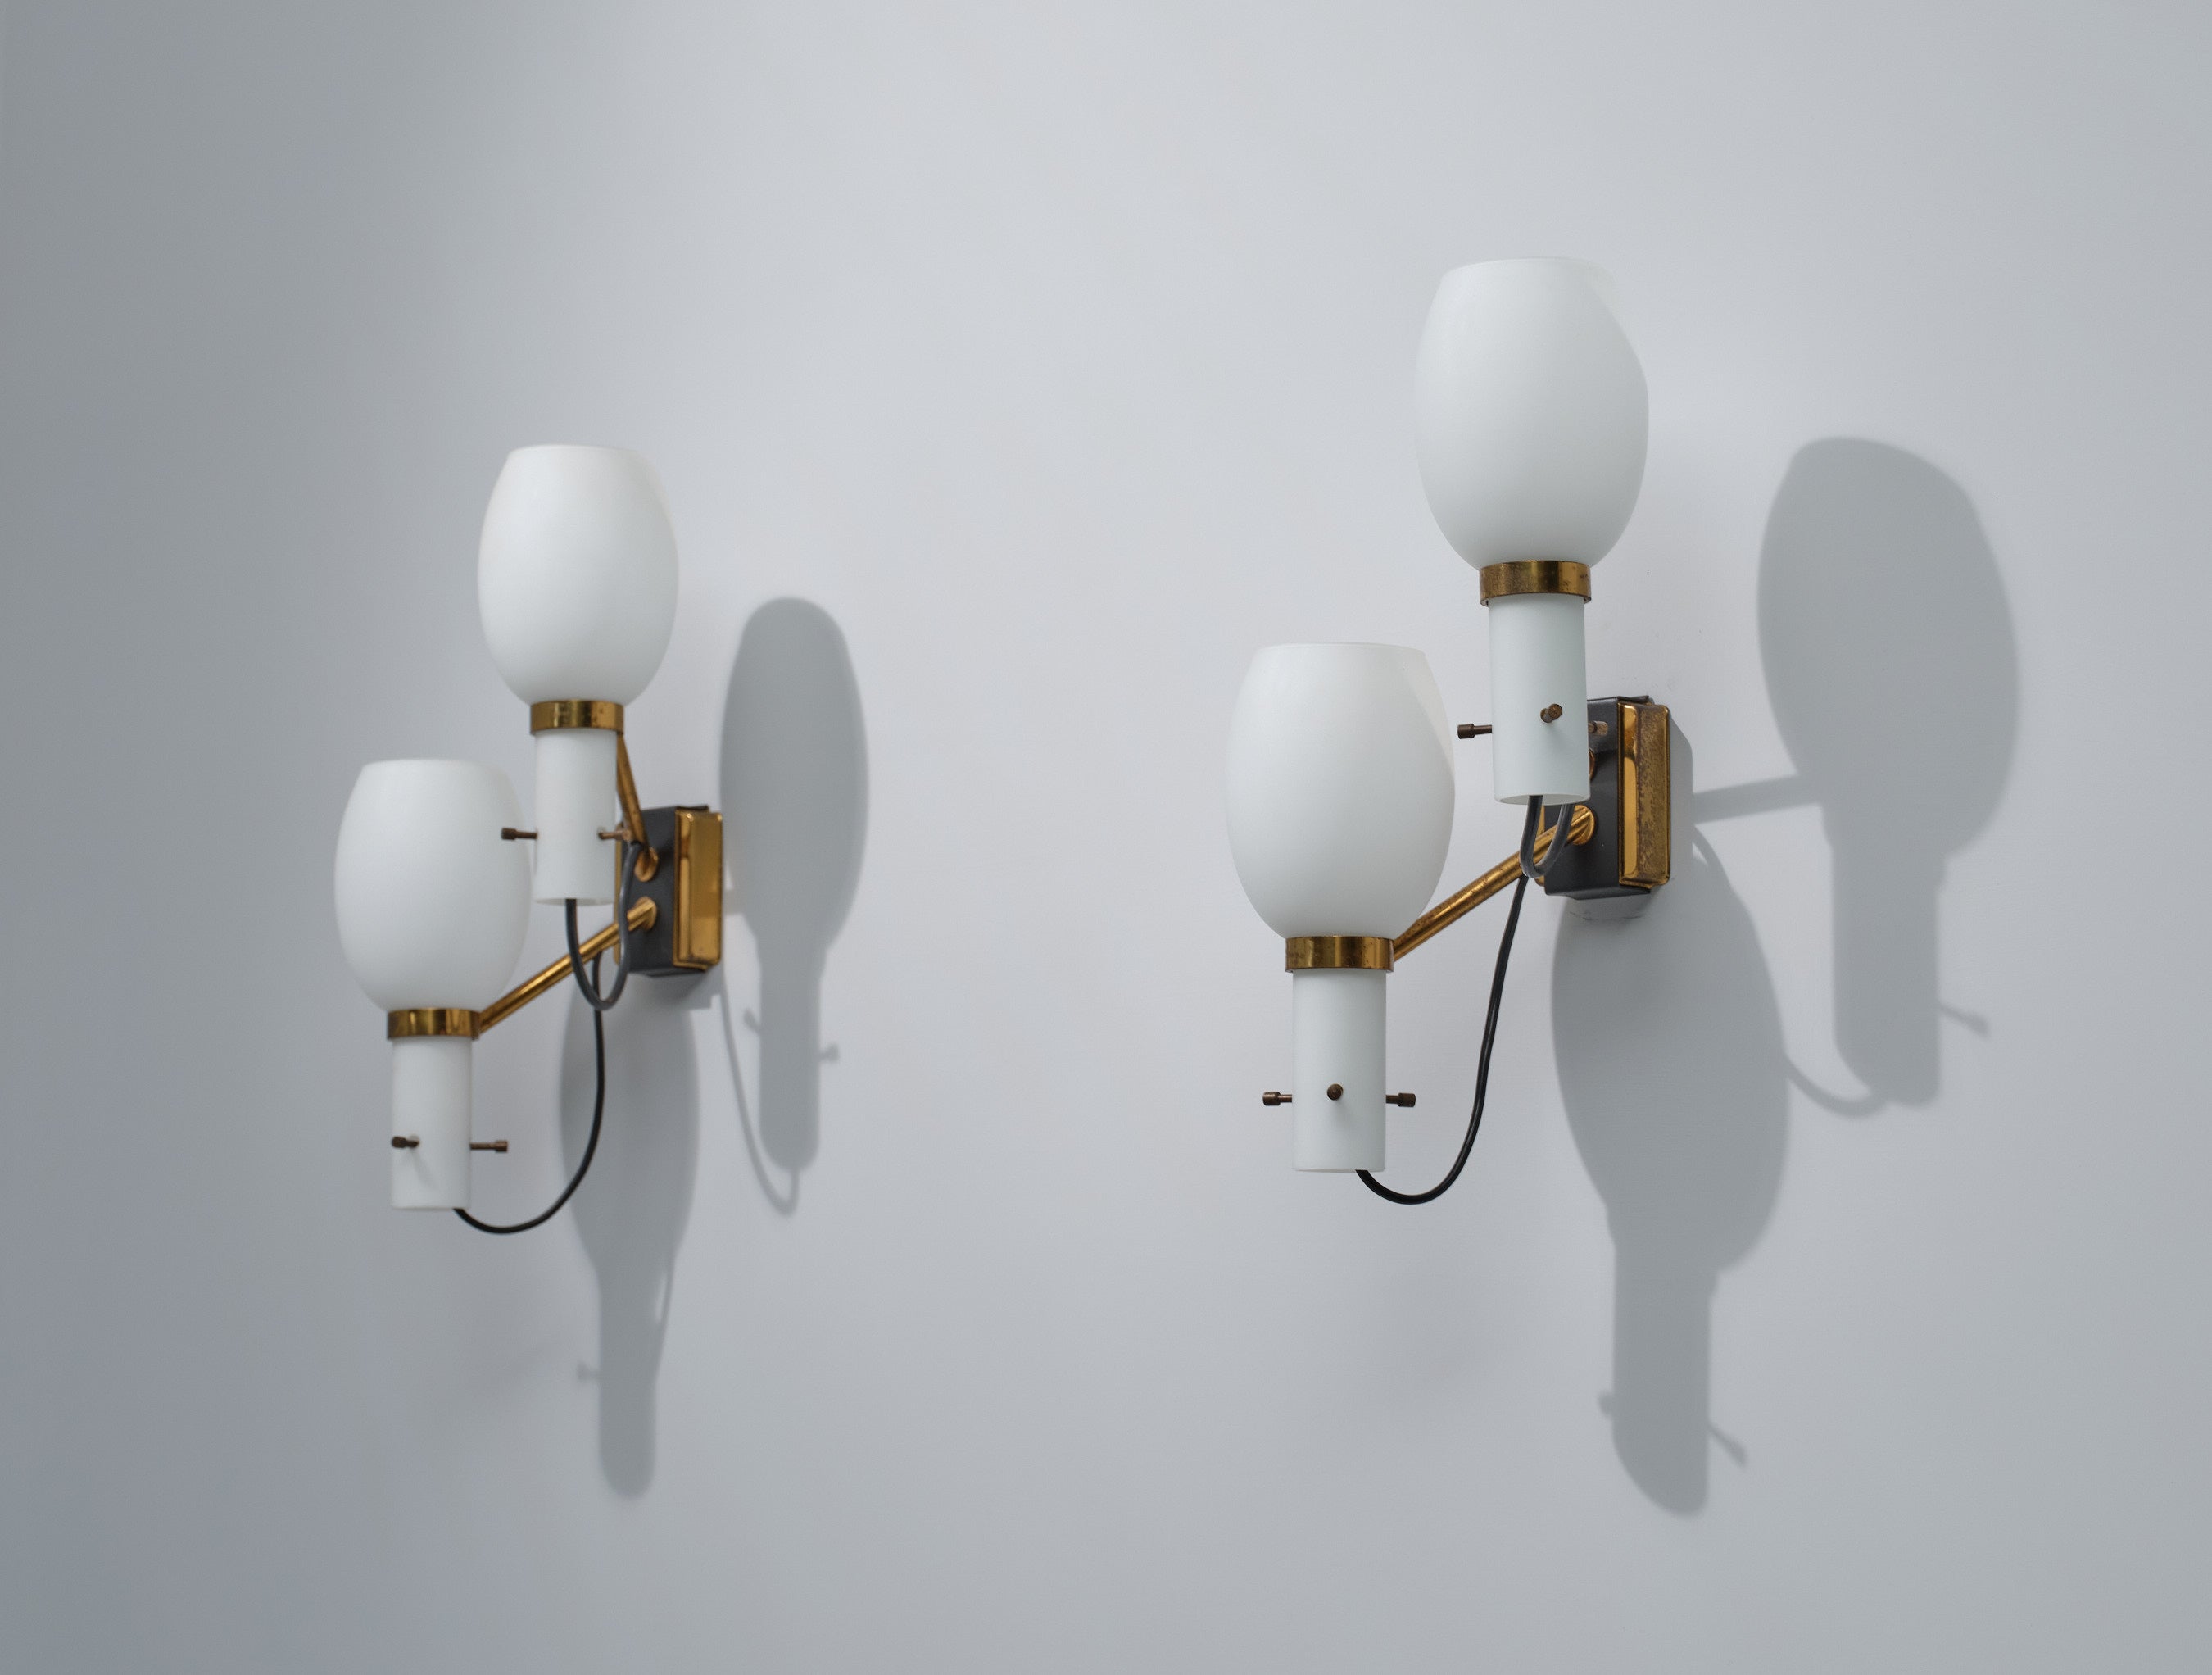 Introducing a Pair of Mid-Century Modern Italian Wall Sconces, each featuring two distinct light sources and exquisite craftsmanship. Elevate the ambiance of your space with these stunning wall sconces, meticulously designed to exude elegance and